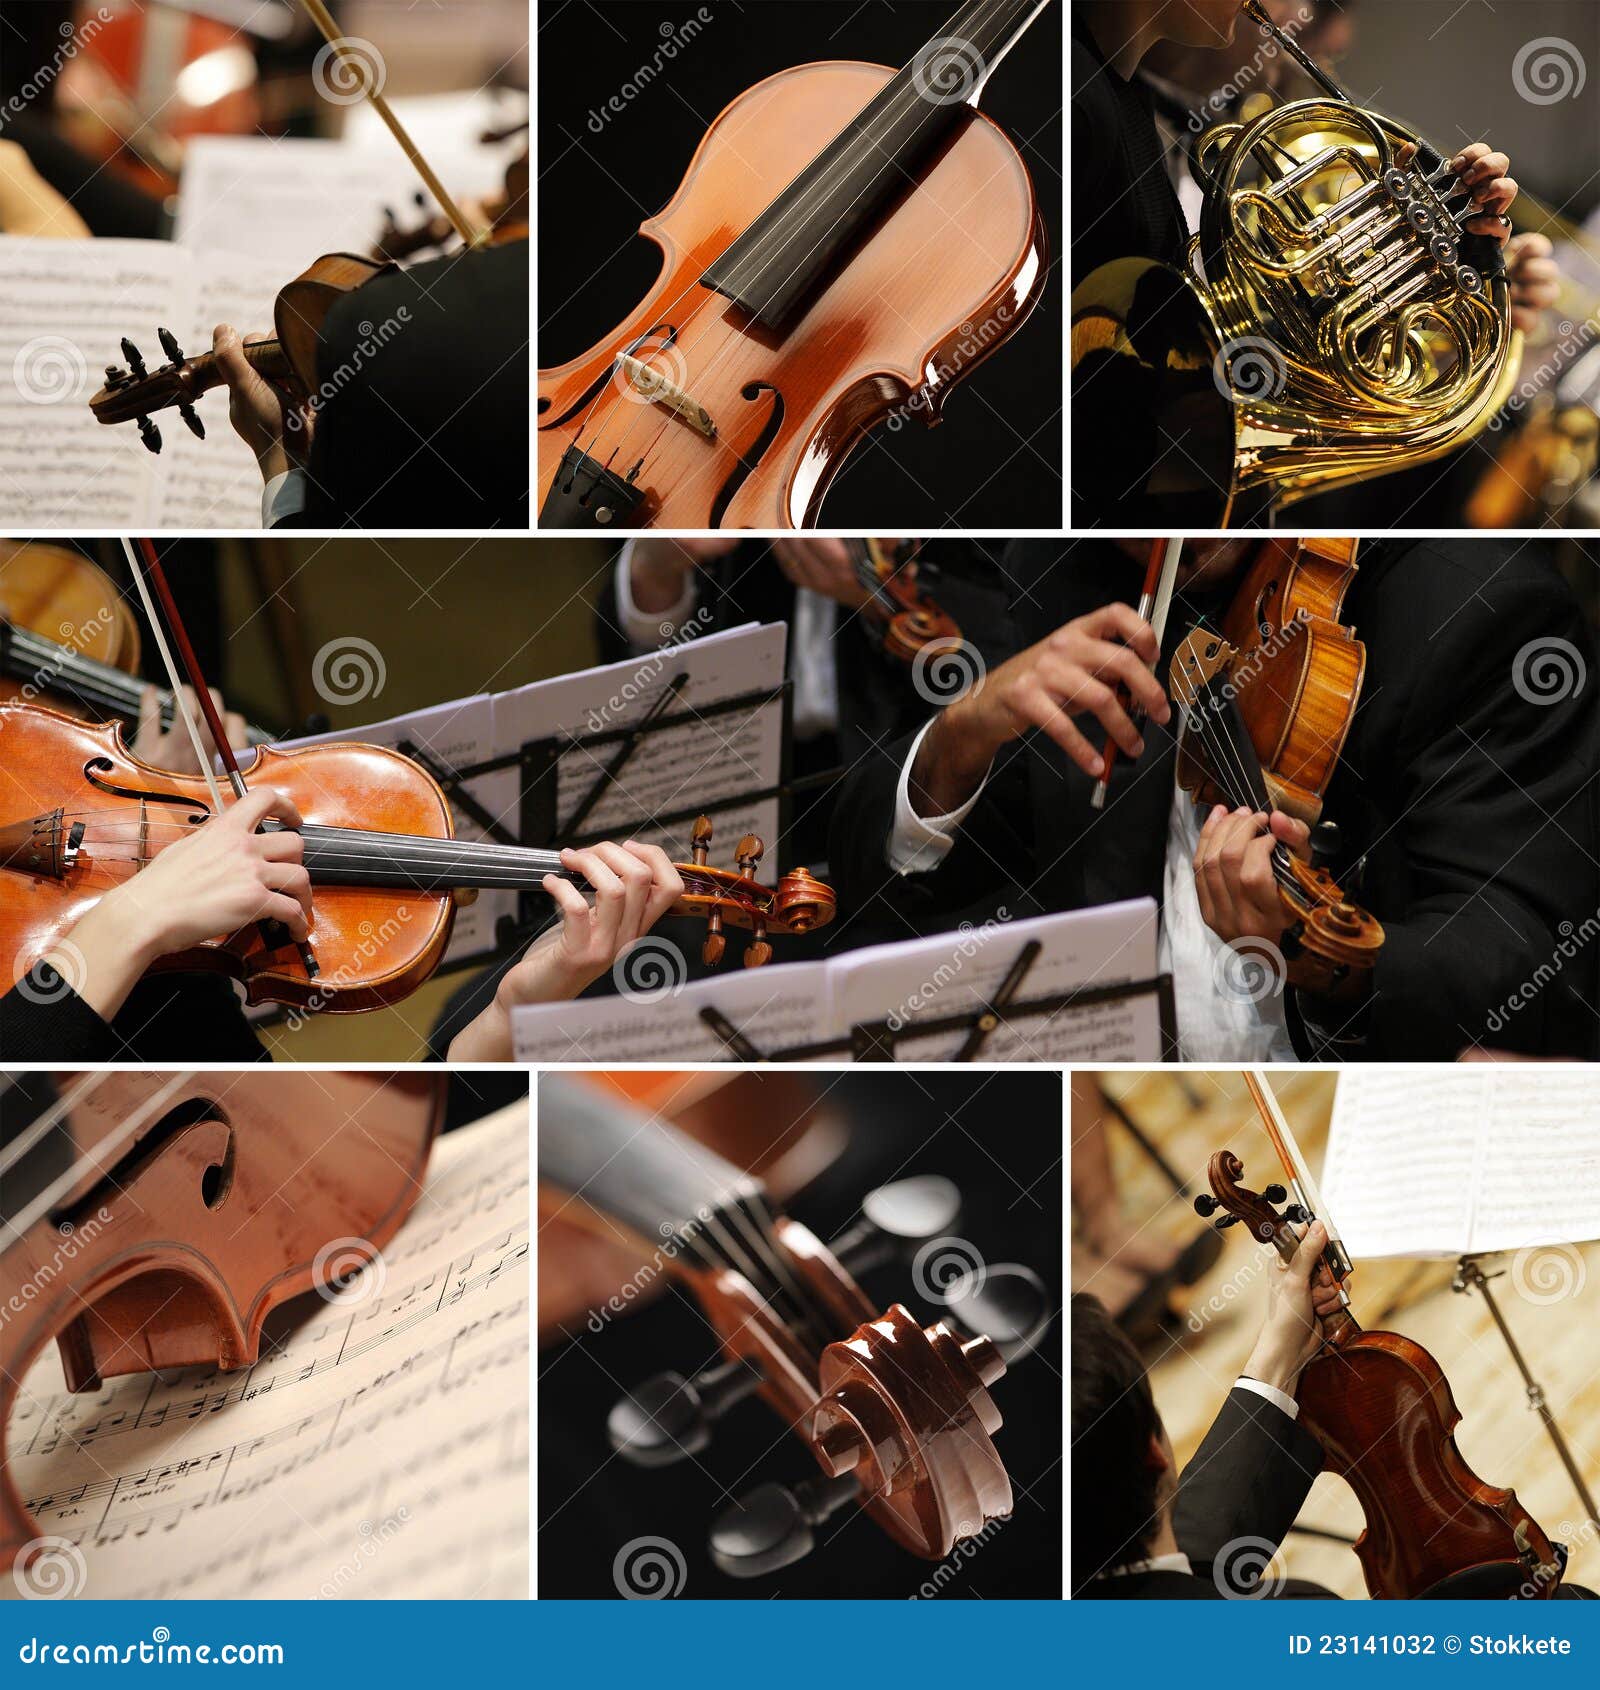 classical music collage